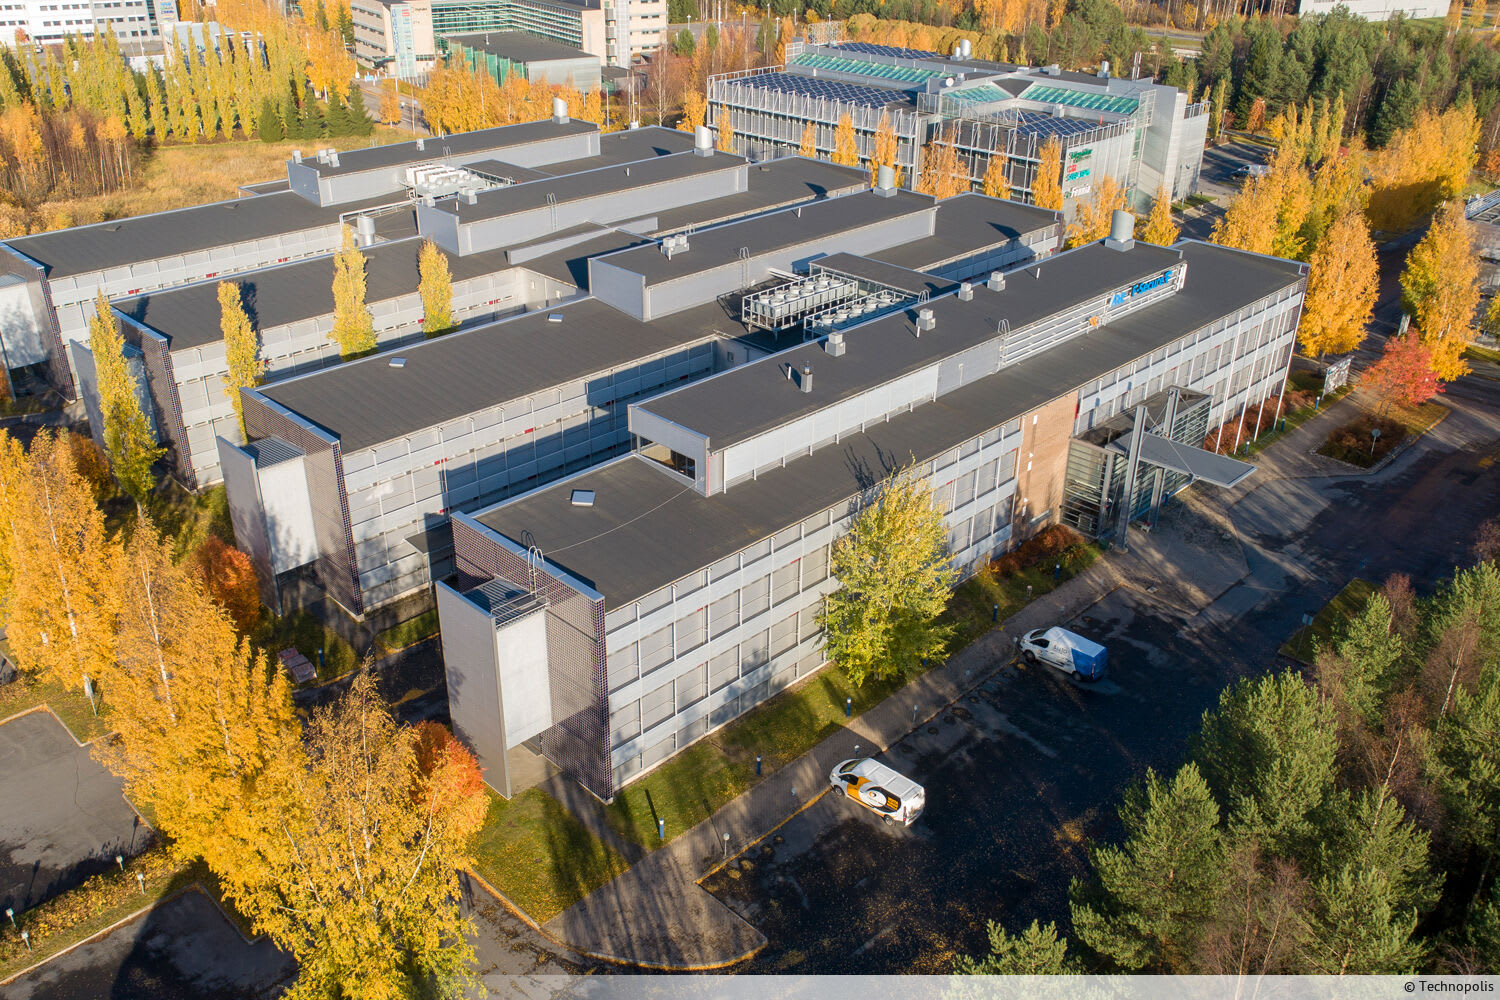 For rent, a large office complex on the second floor, which includes, among other things, office and conference rooms, kitchen and break rooms. Technopolis Linnanmaa campus offers its tenants a wide range of services.